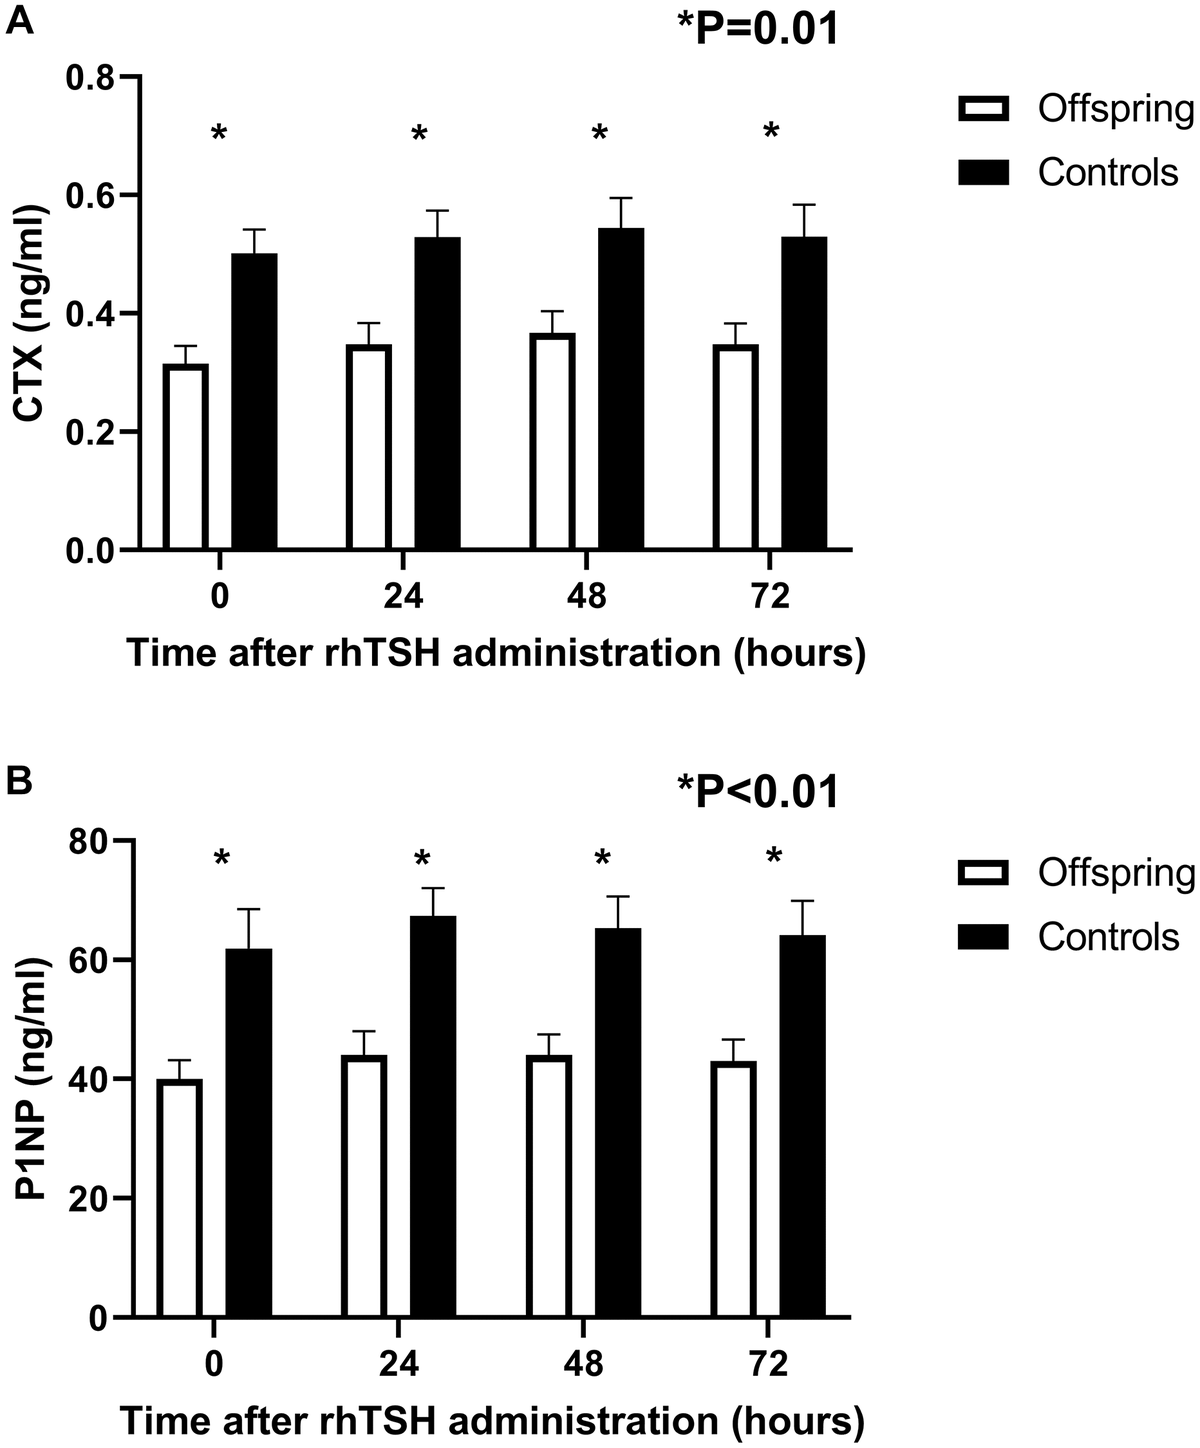 Concentration profiles of bone resorption (CTX) and bone formation (P1NP) markers over time in offspring from long-lived families (n = 14) and controls (n = 12) following a challenge with 0.1 mg rhTSH. (A) Mean circulating CTX at 24-hour intervals following rhTSH administration. (B) Mean circulating P1NP at 24-hour intervals following rhTSH administration. rhTSH: recombinant human thyroid stimulating hormone, CTX: collagen type 1 C-terminal cross-linked telopeptide (CTX), P1NP: N-terminal propeptide of type 1 collagen. Error bars: standard error of the mean.